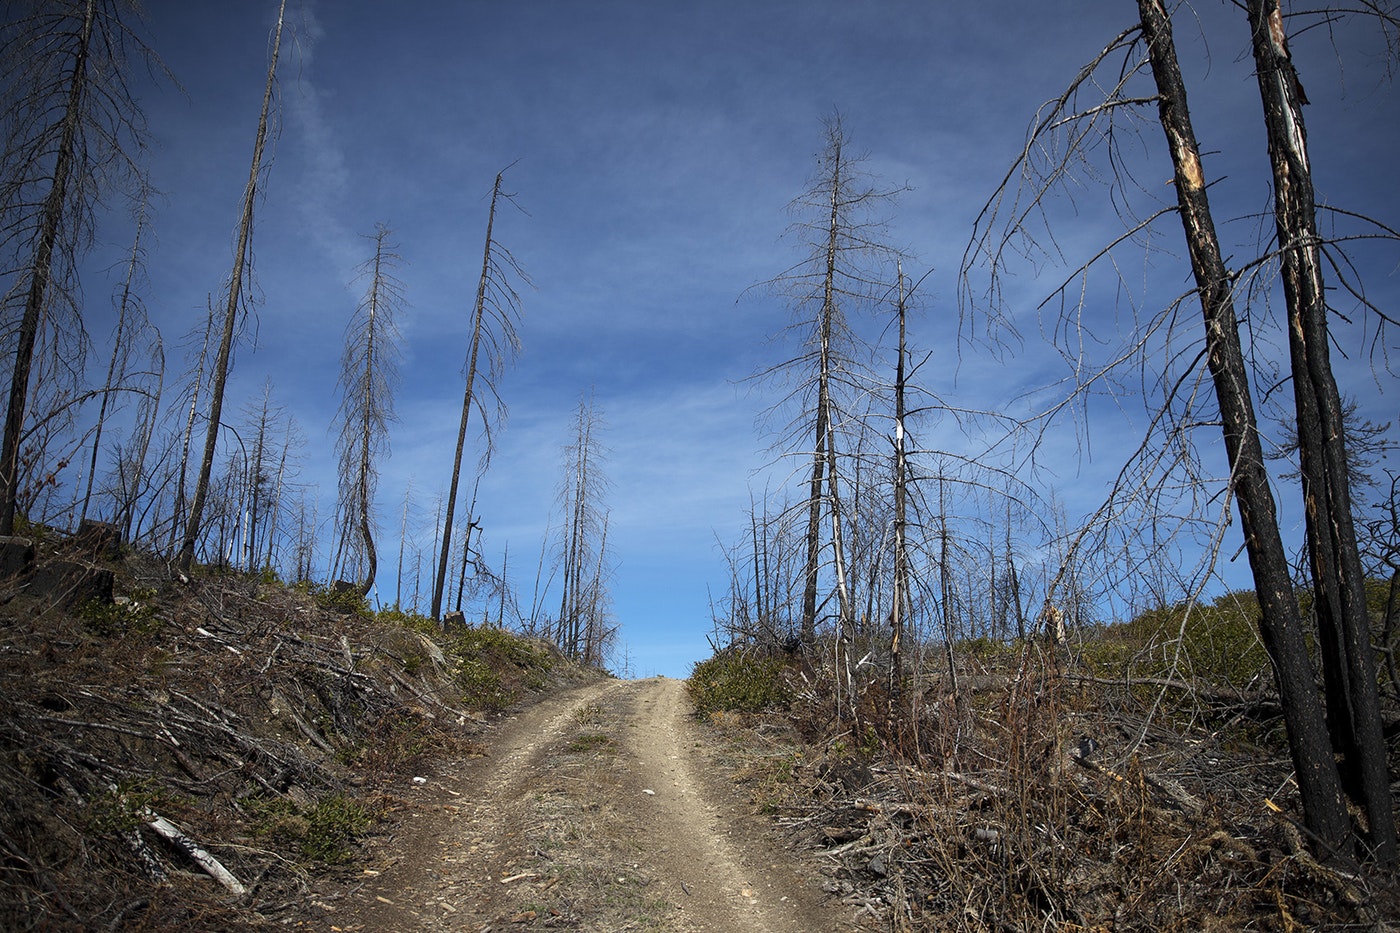 An area that was burned in the Carlton Complex fire is shown on Tuesday, April 23, 2019, along Highway 20 near Loup Loup Pass Ski Bowl, east of Twisp, Washington. CREDIT: KUOW PHOTO/MEGAN FARMER